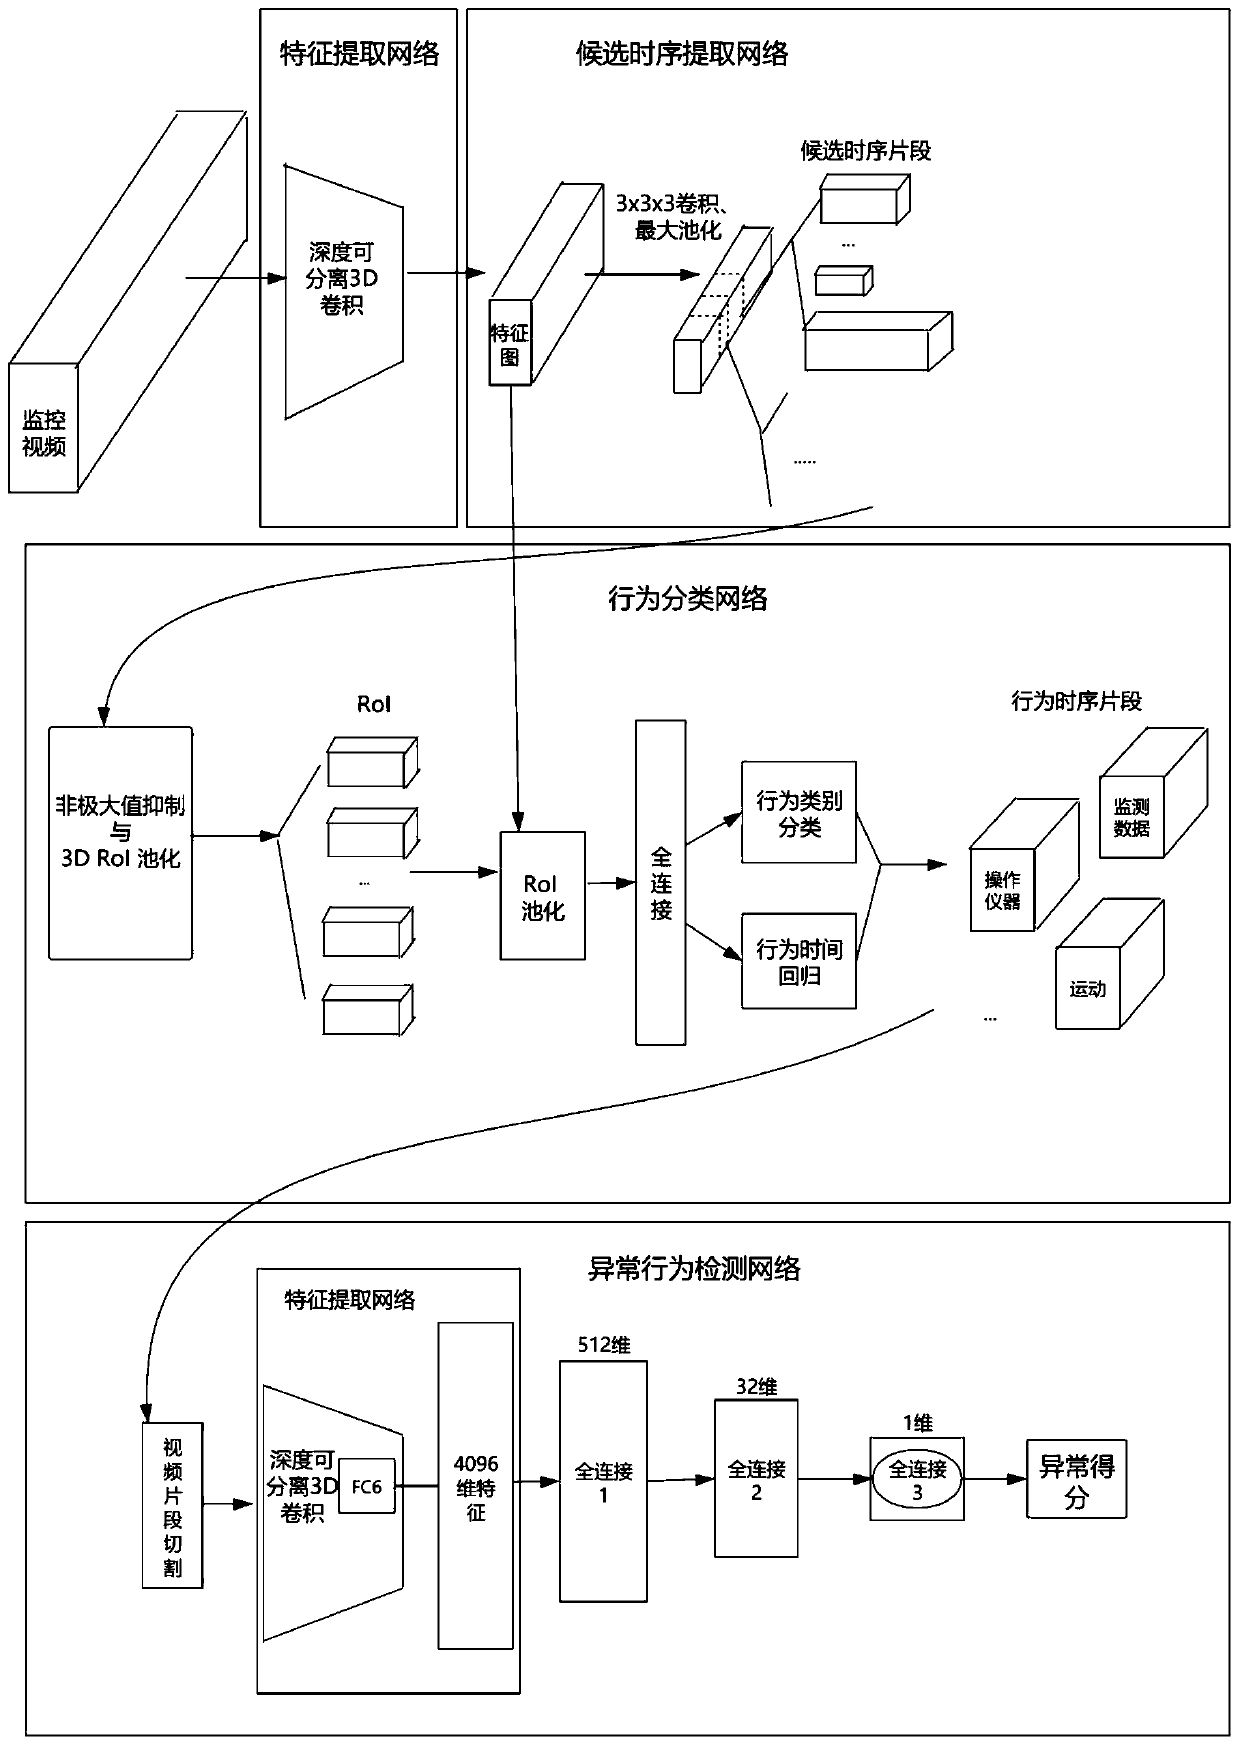 Transformer substation personnel behavior recognition method based on monitoring video time sequence action positioning and anomaly detection